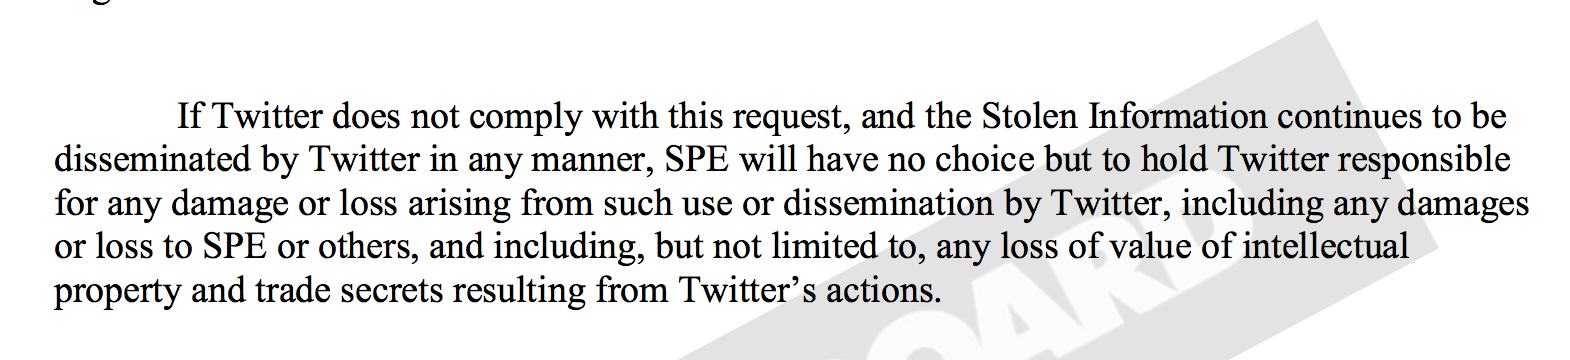 From the letter sent by Sony's lawyer to Twitter's general counsel.